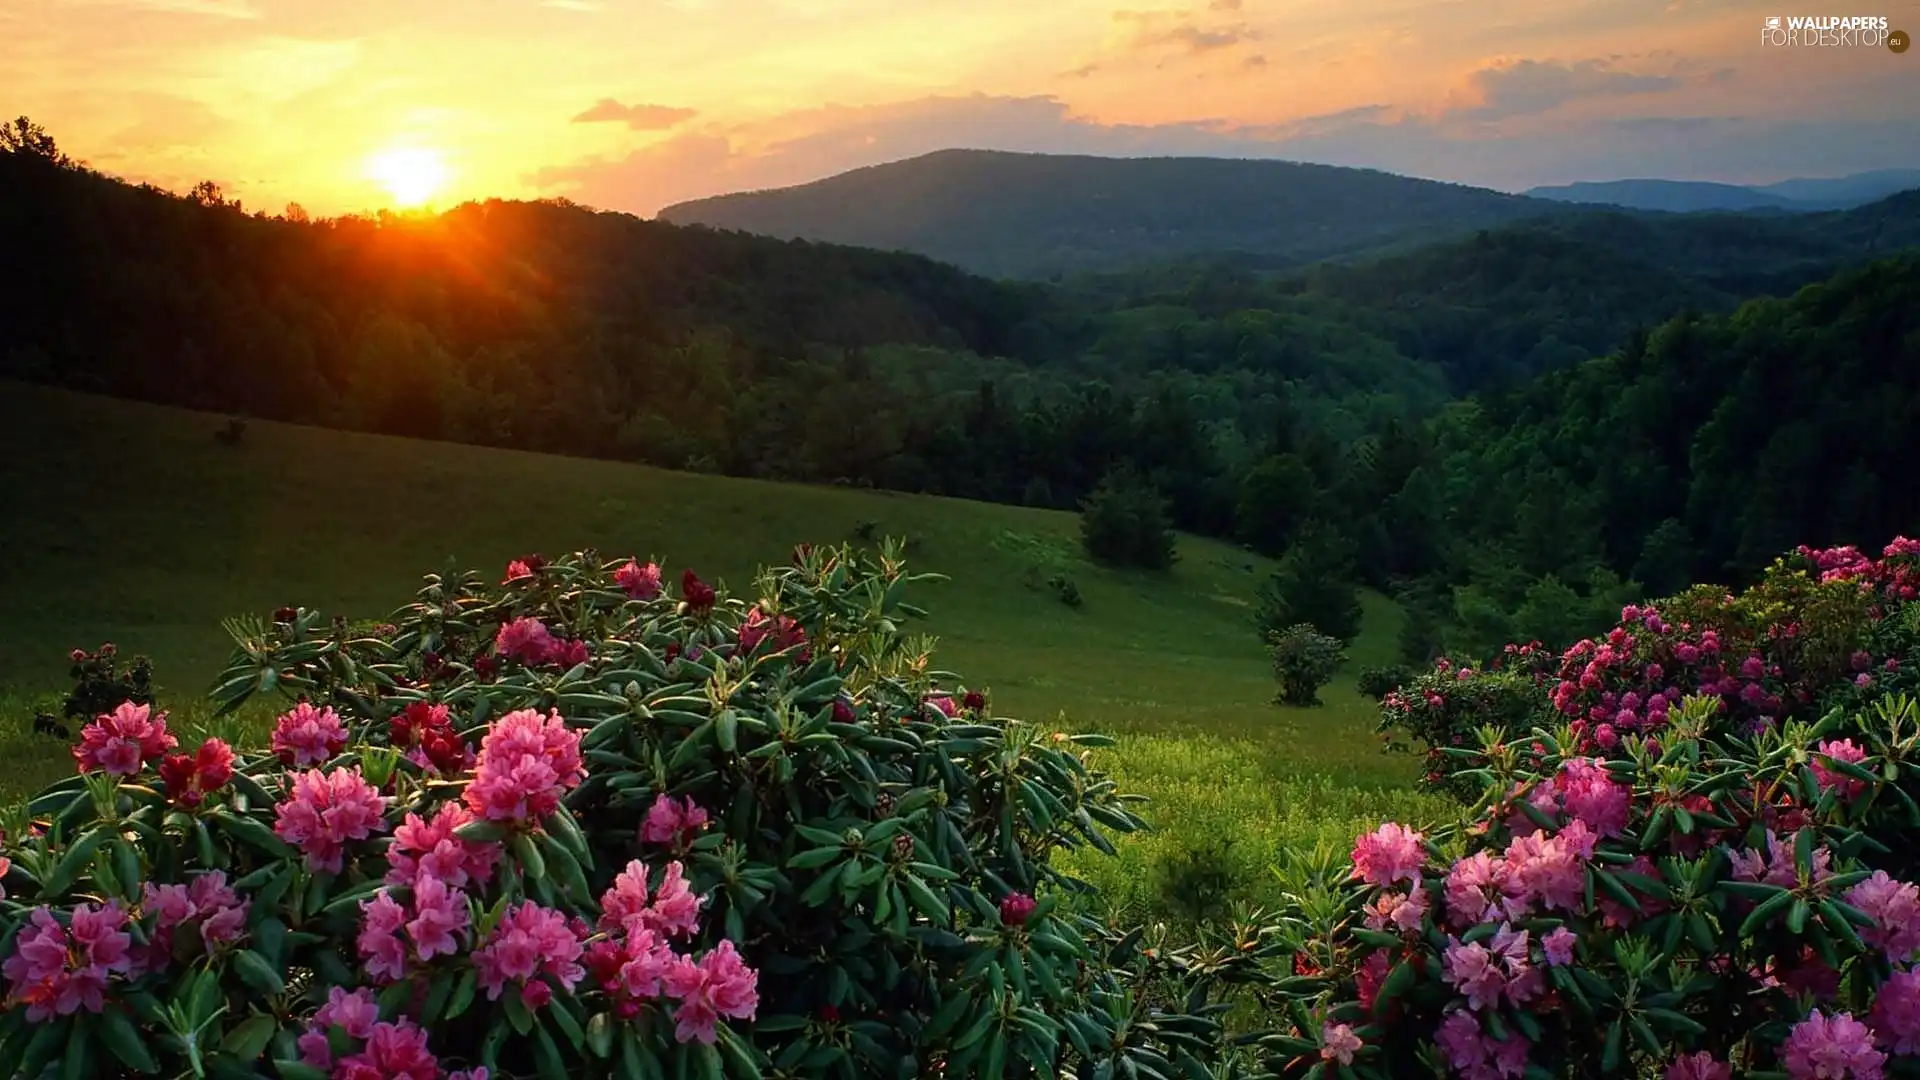 west, The Hills, flourishing, Rhododendrons, sun, woods